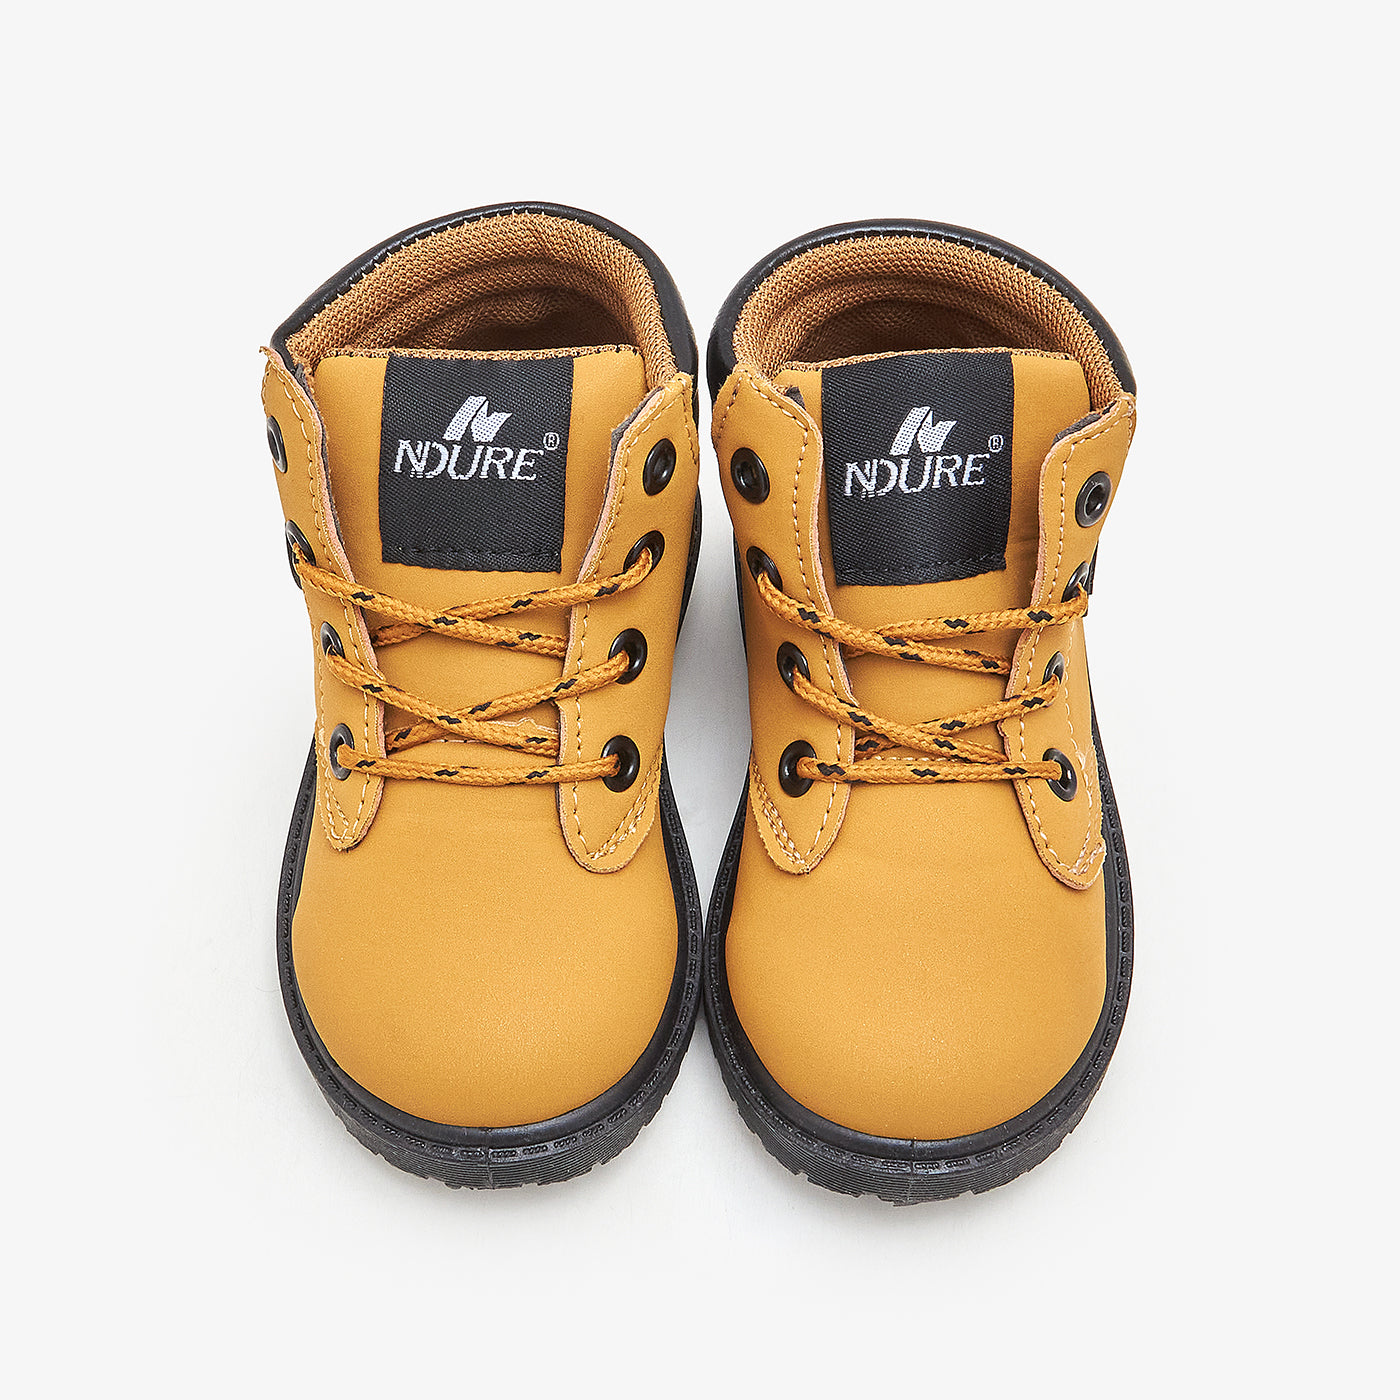 Winter Boots for Boys